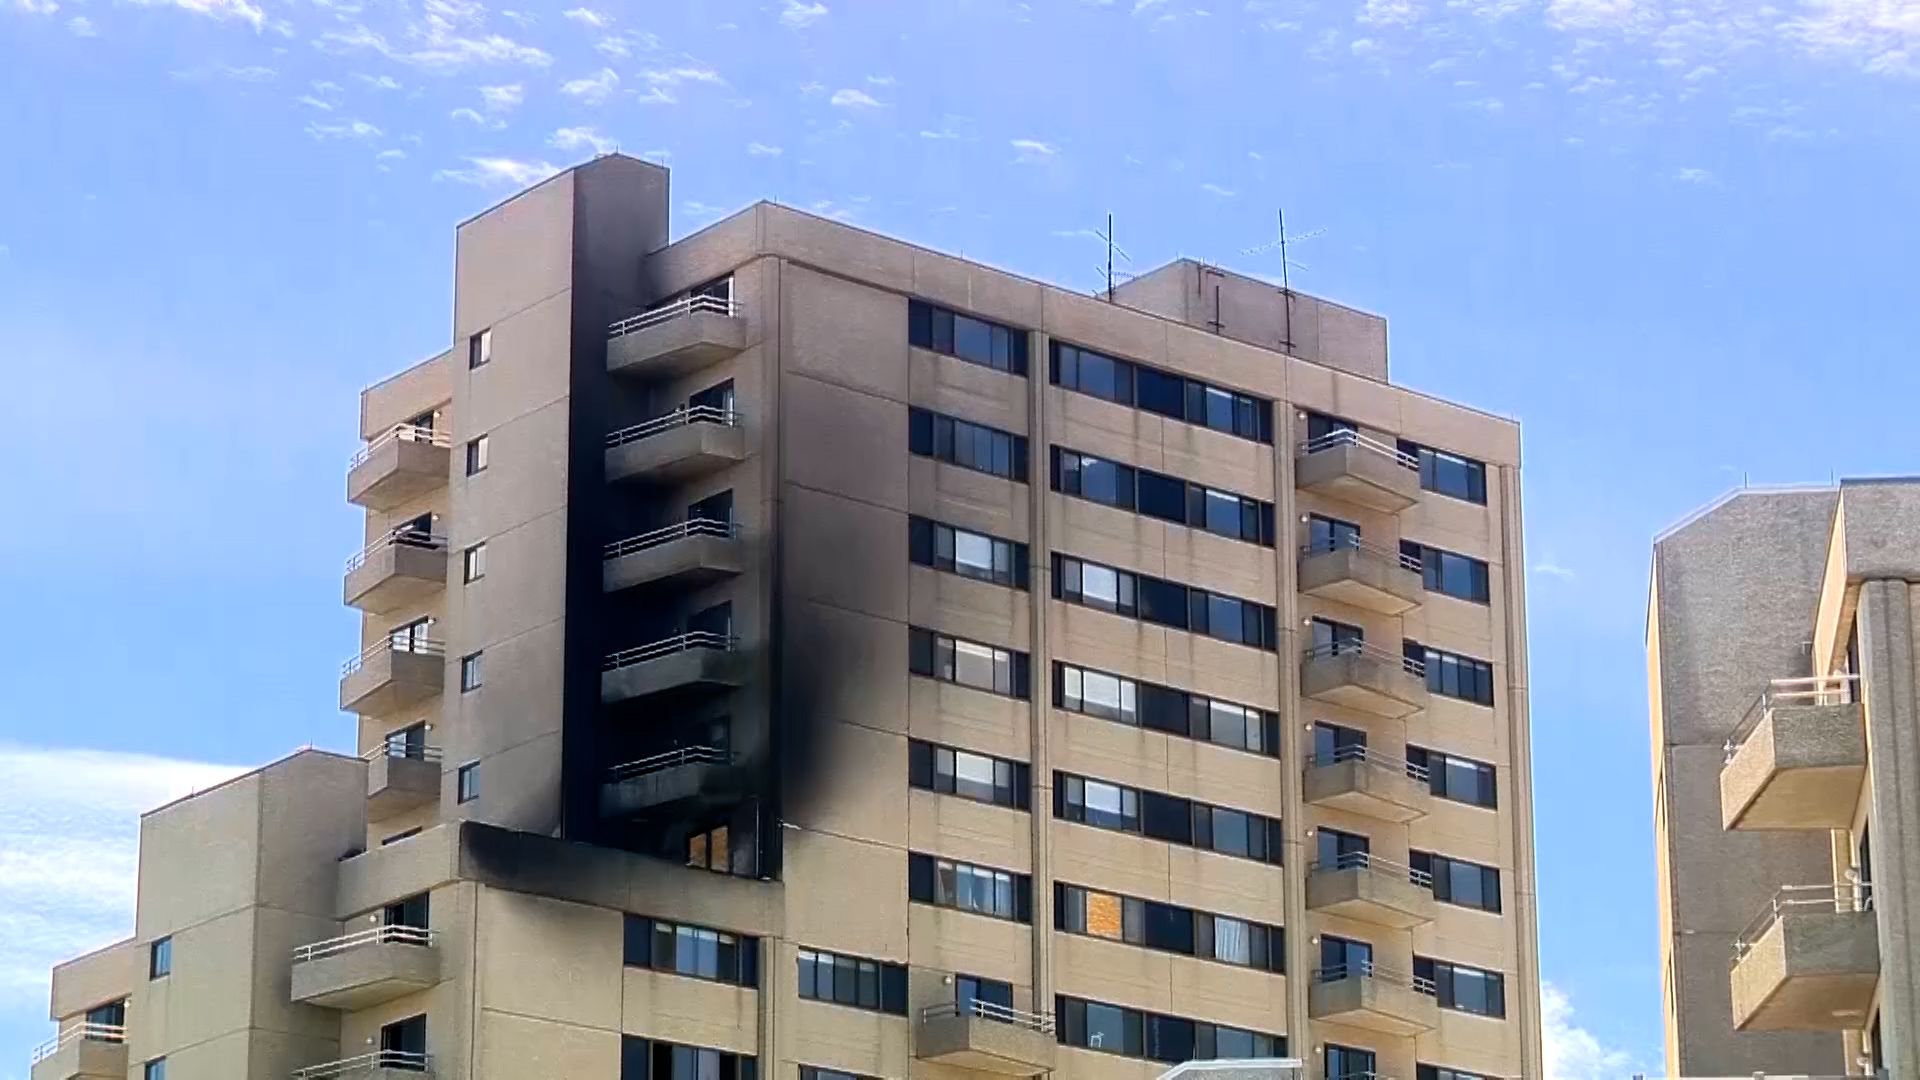 Residents of Revere high-rise left scrambling as building is condemned after fire